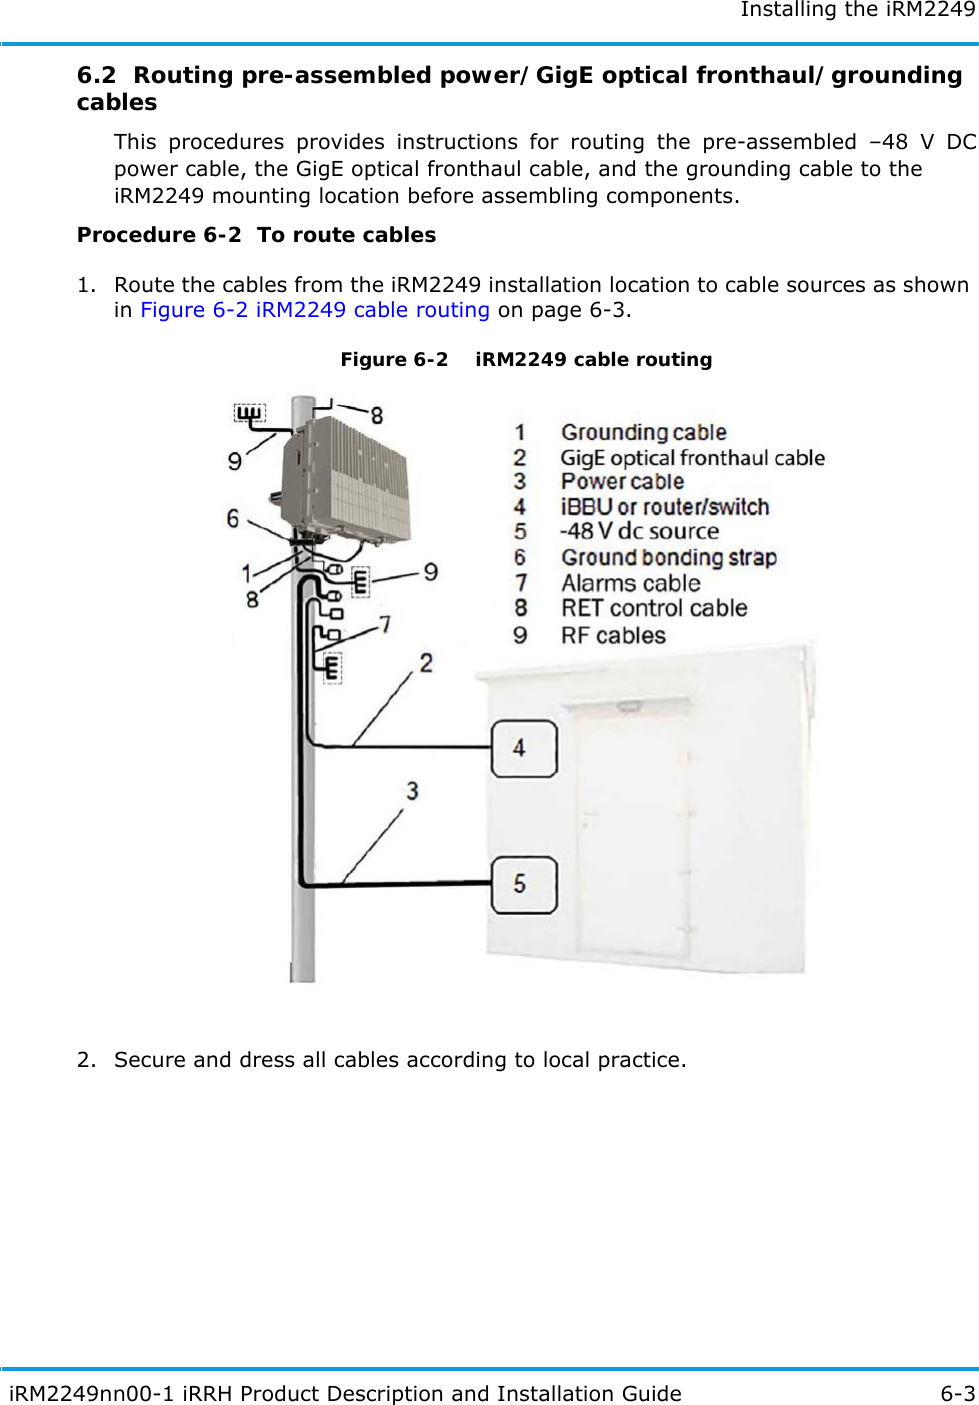 Installing the iRM2249 iRM2249nn00-1 iRRH Product Description and Installation Guide 6-36.2  Routing pre-assembled power/GigE optical fronthaul/grounding cablesThis procedures provides instructions for routing the pre-assembled –48 V DC power cable, the GigE optical fronthaul cable, and the grounding cable to theiRM2249 mounting location before assembling components.Procedure 6-2  To route cables1. Route the cables from the iRM2249 installation location to cable sources as shown in Figure 6-2 iRM2249 cable routing on page 6-3.Figure 6-2   iRM2249 cable routing2. Secure and dress all cables according to local practice.